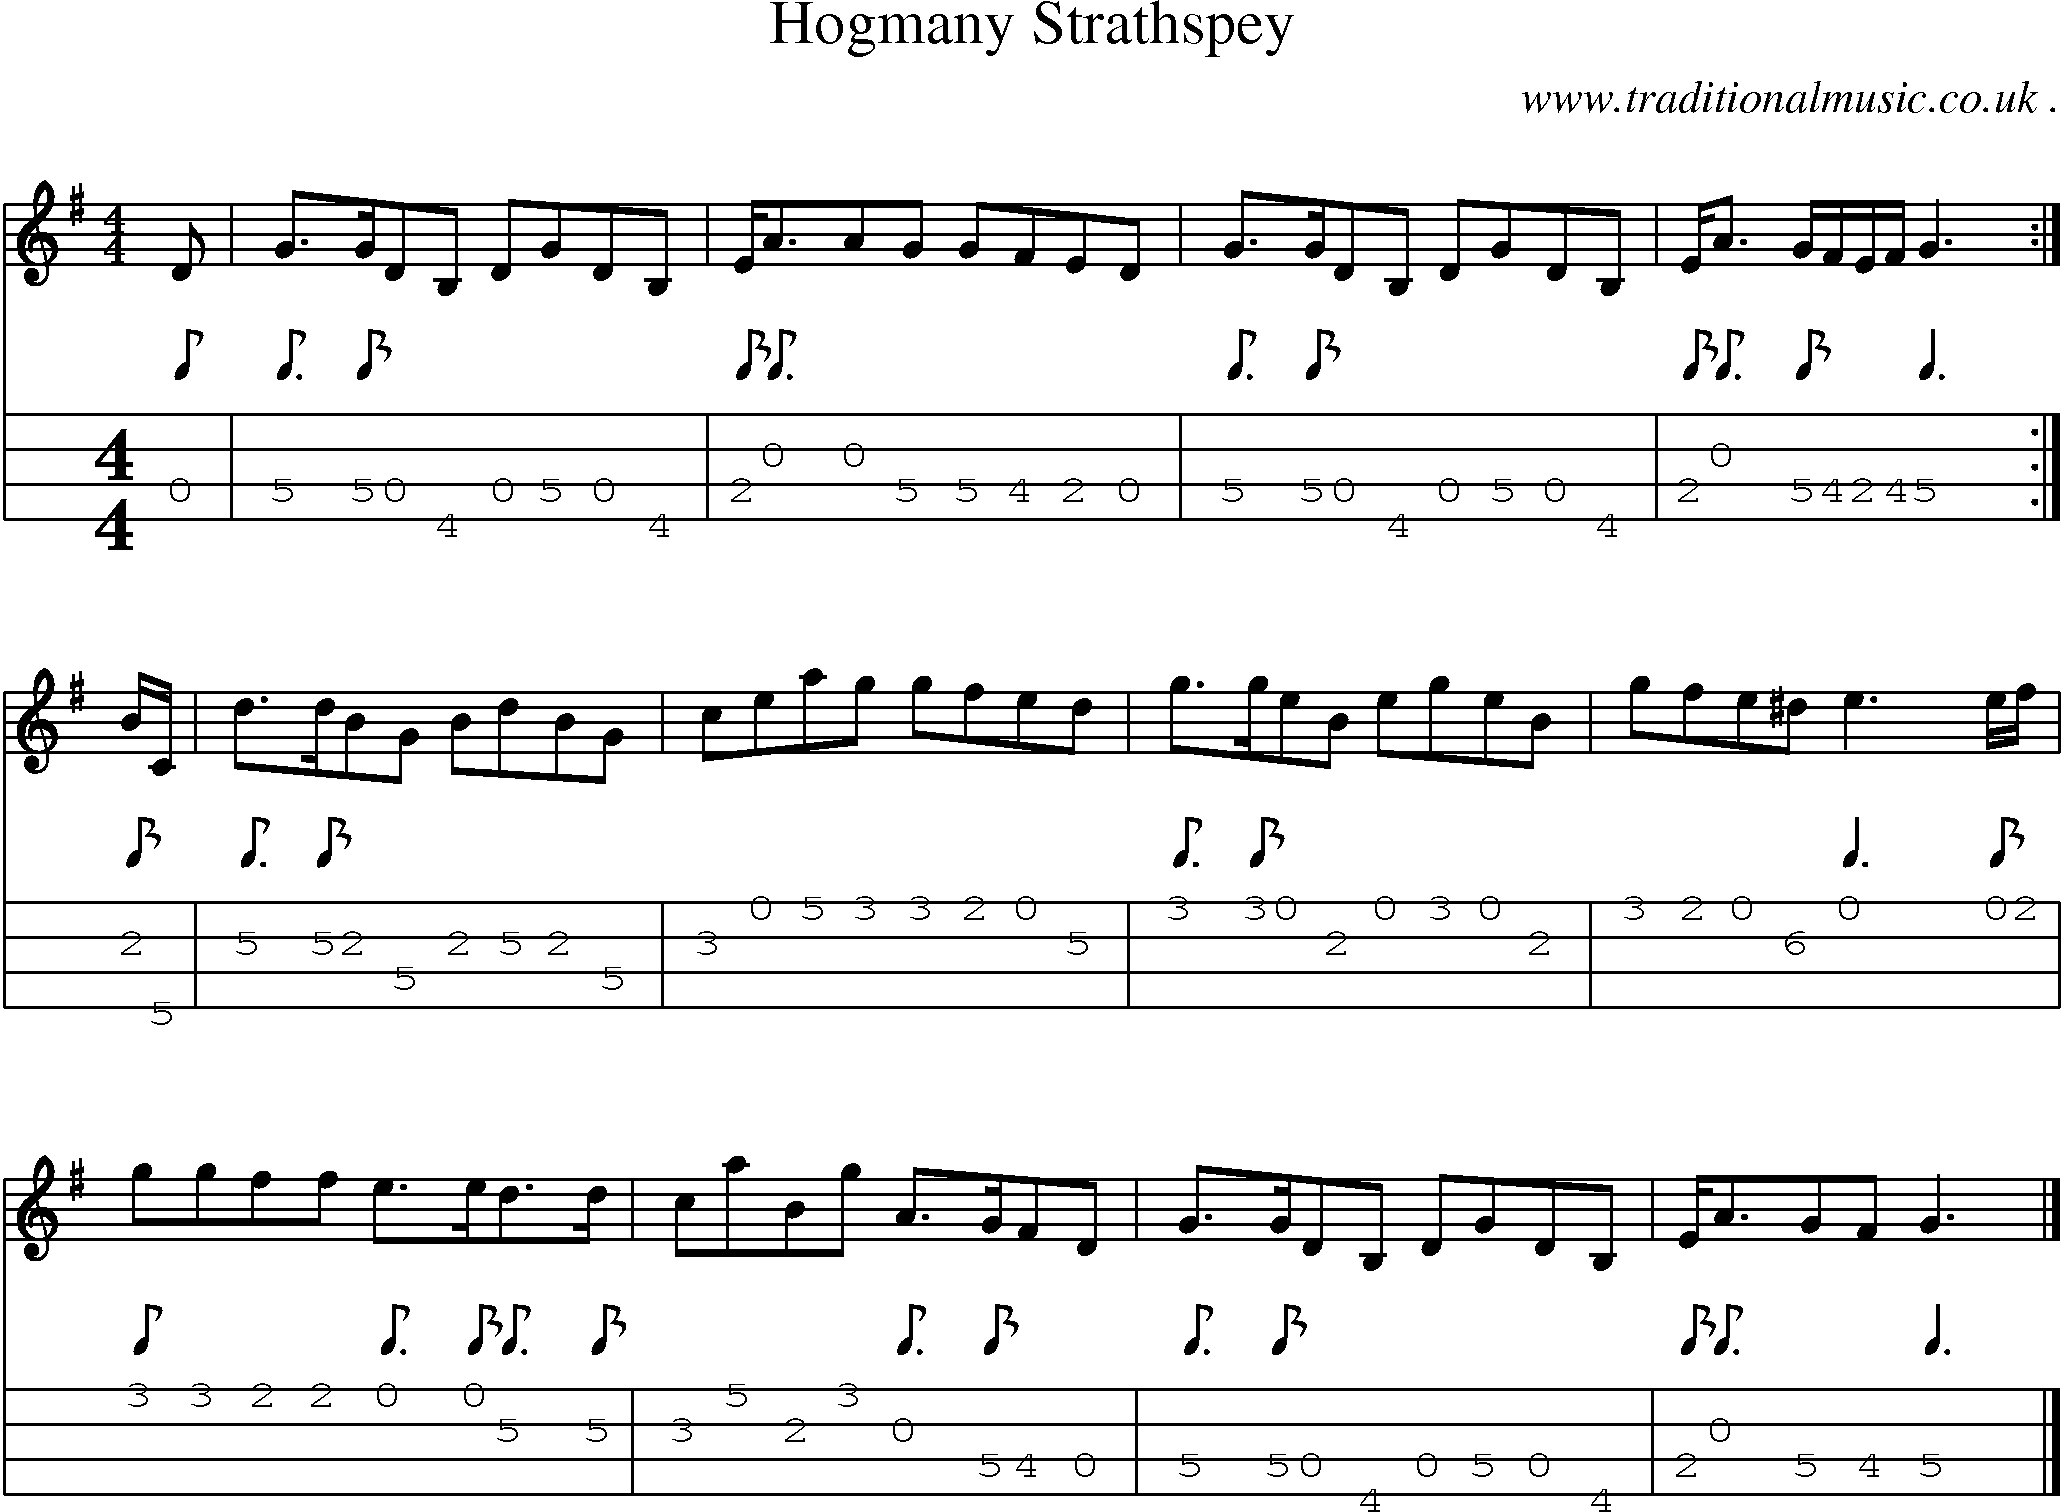 Sheet-music  score, Chords and Mandolin Tabs for Hogmany Strathspey